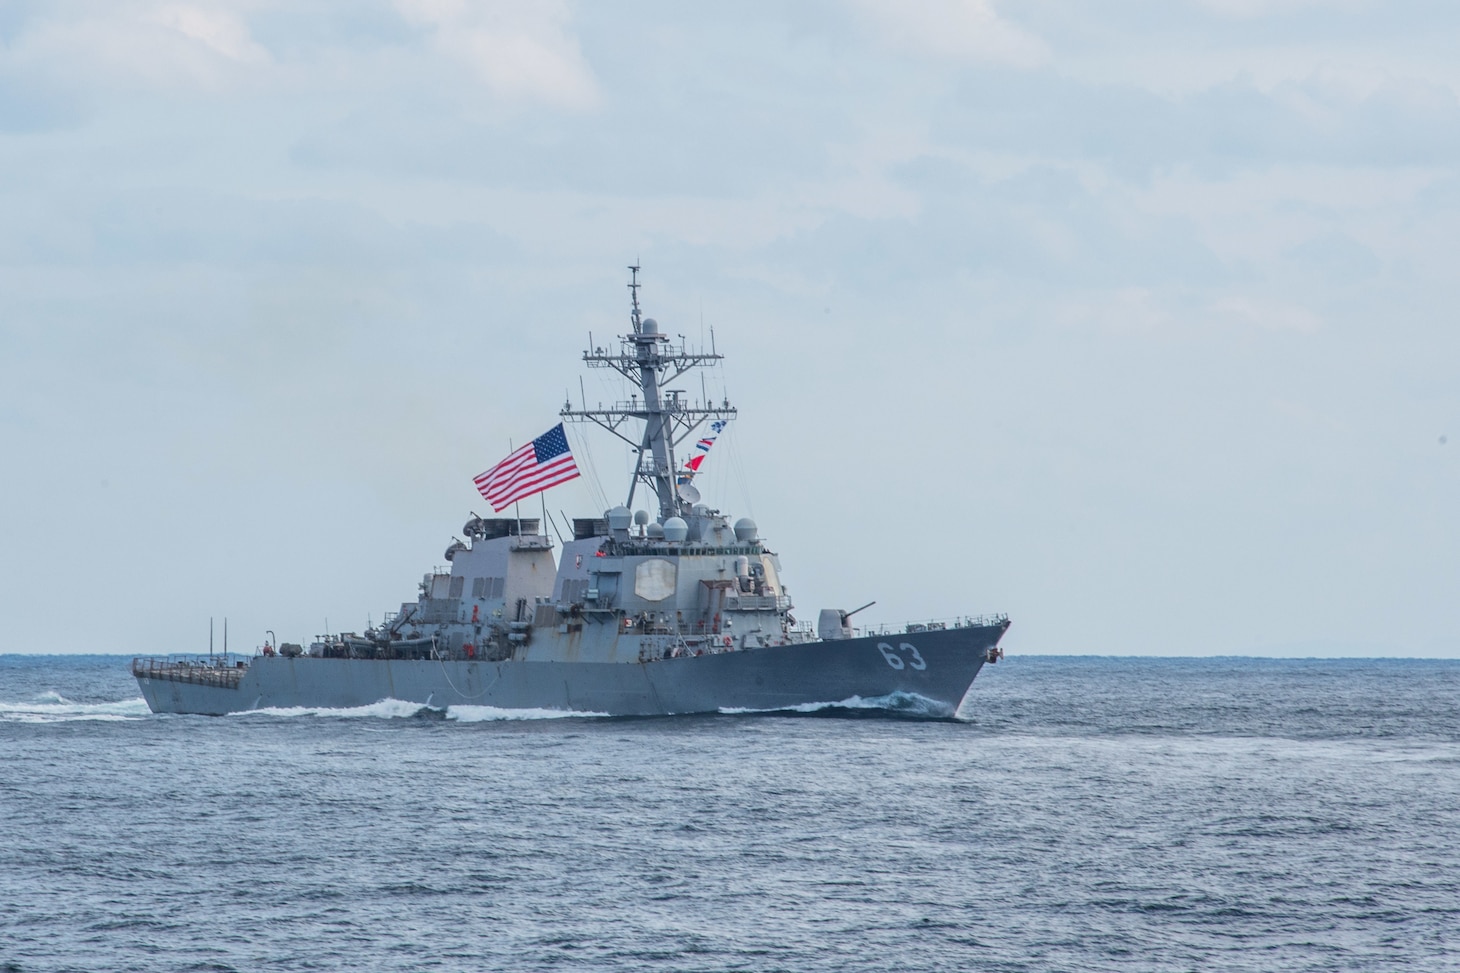 File photo of the Arleigh Burke-class guided-missile destroyer USS Stethem (DDG 63).